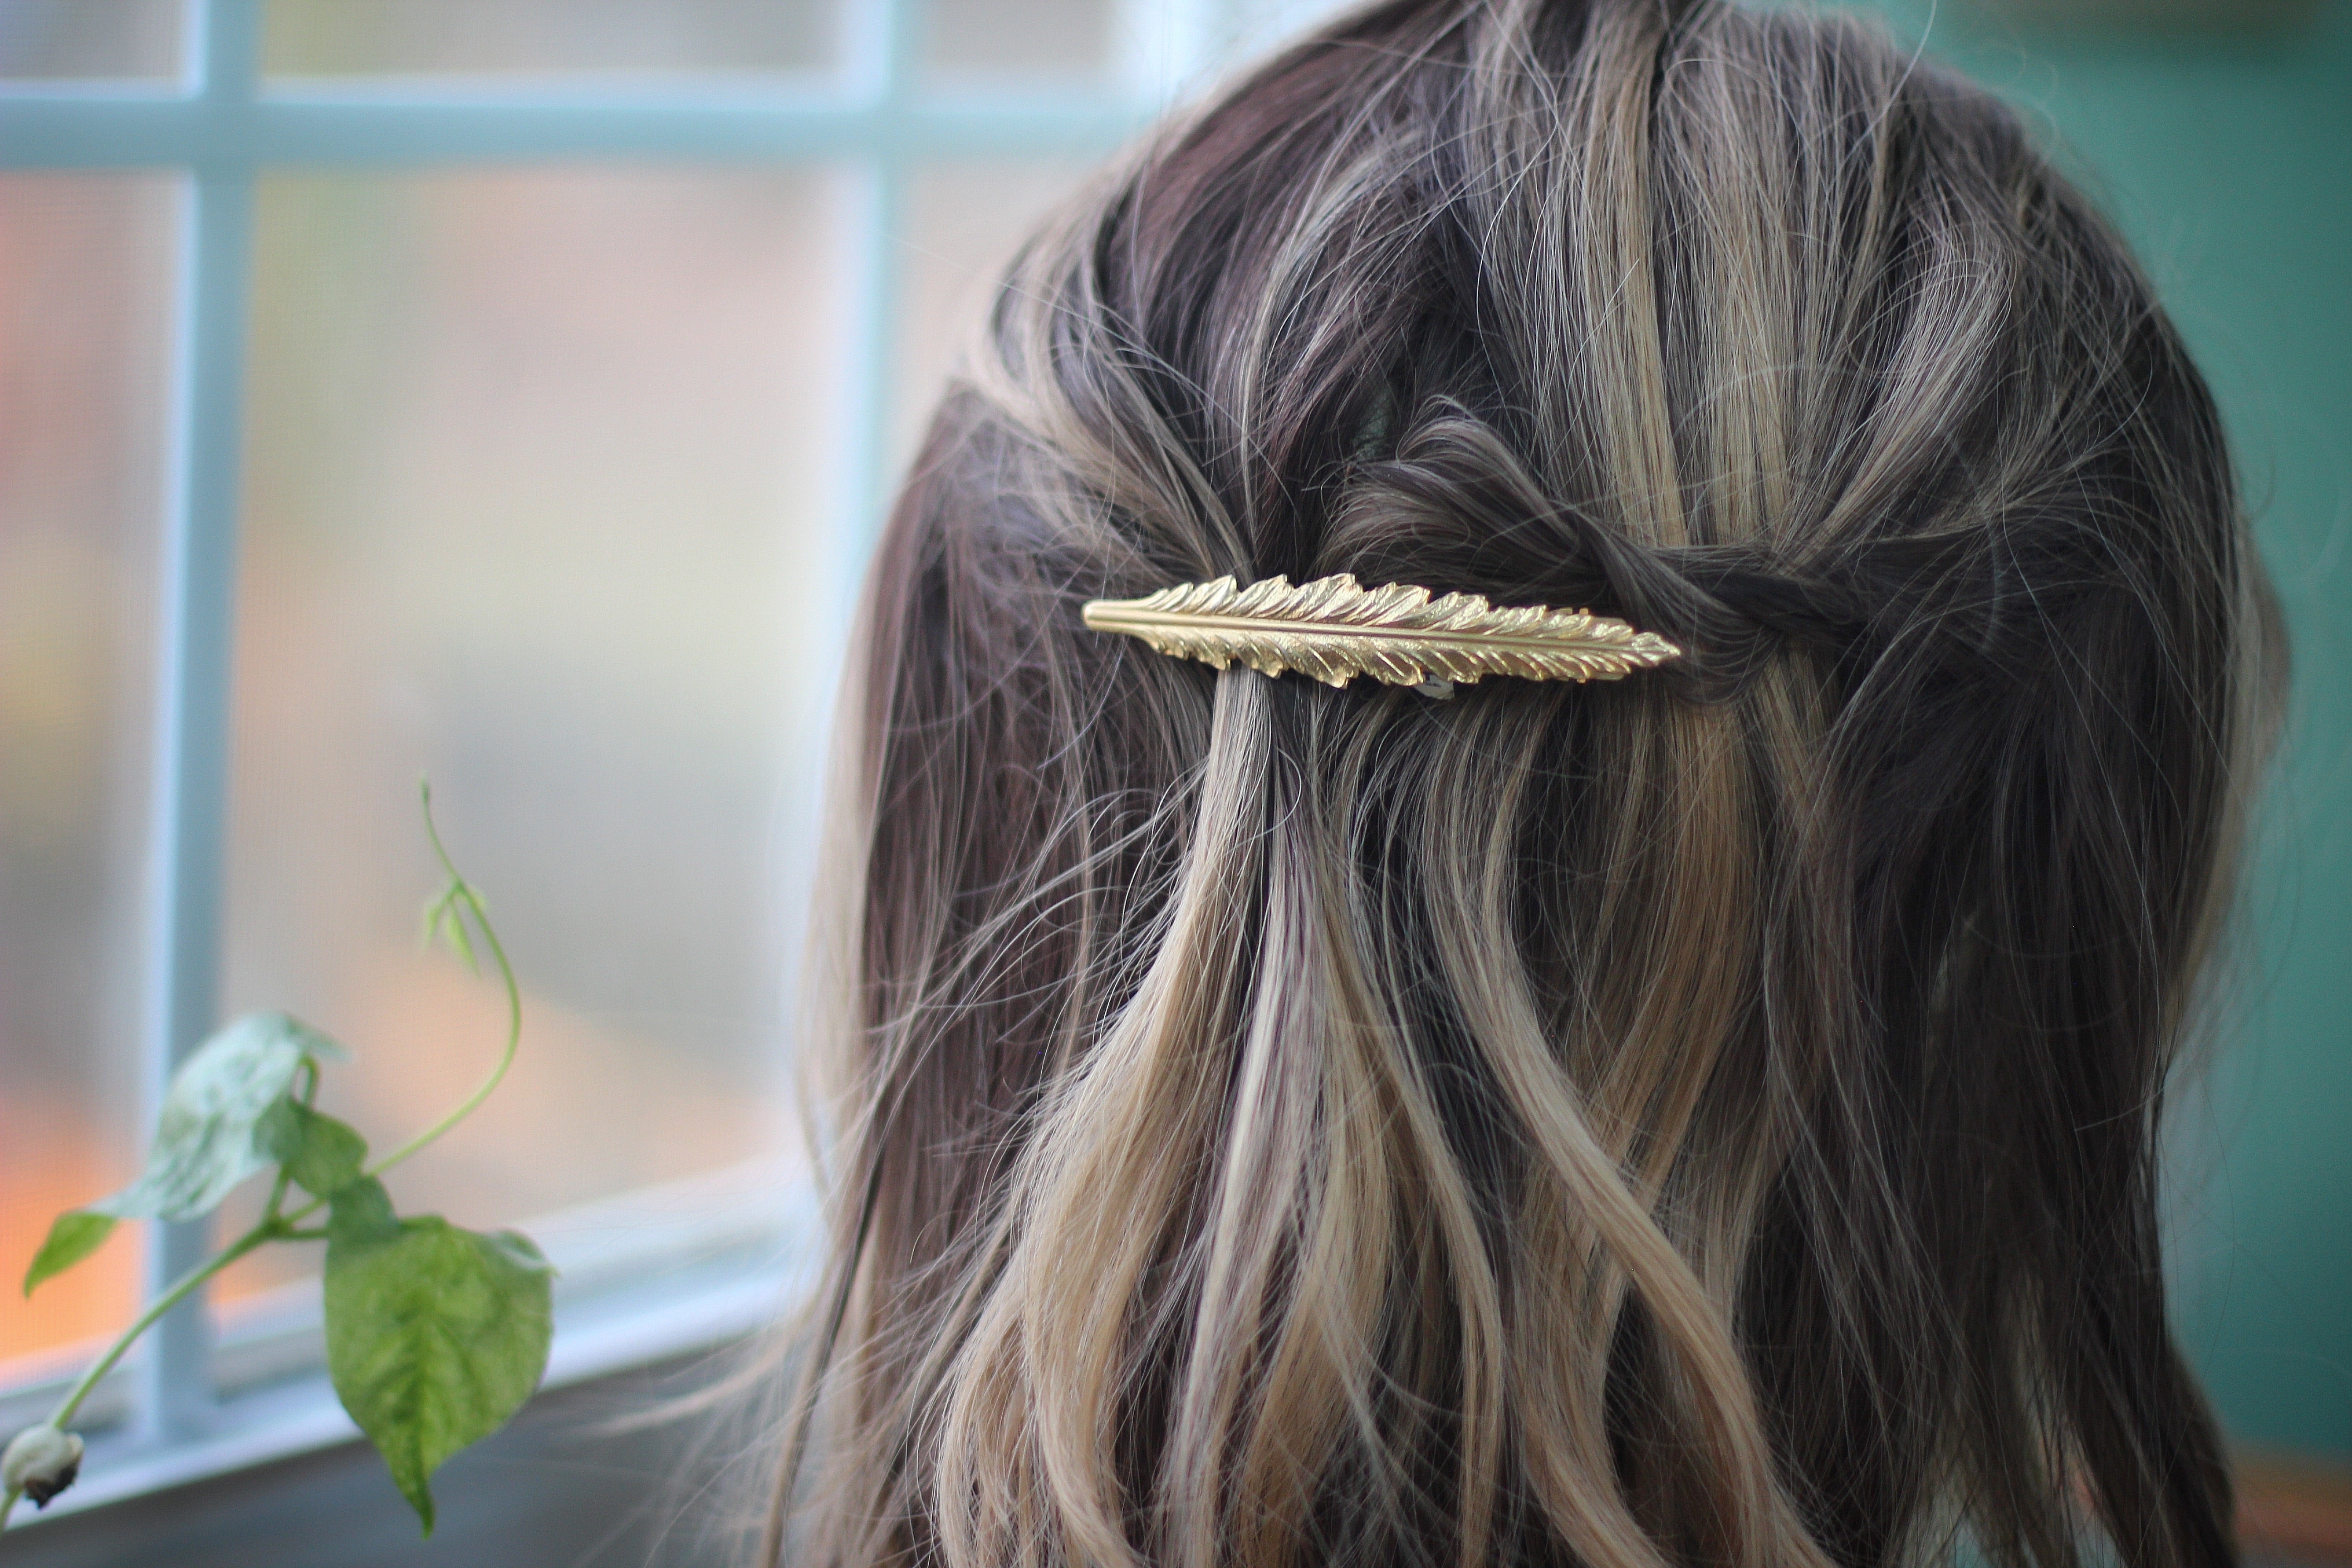 Indian Feather Barrette